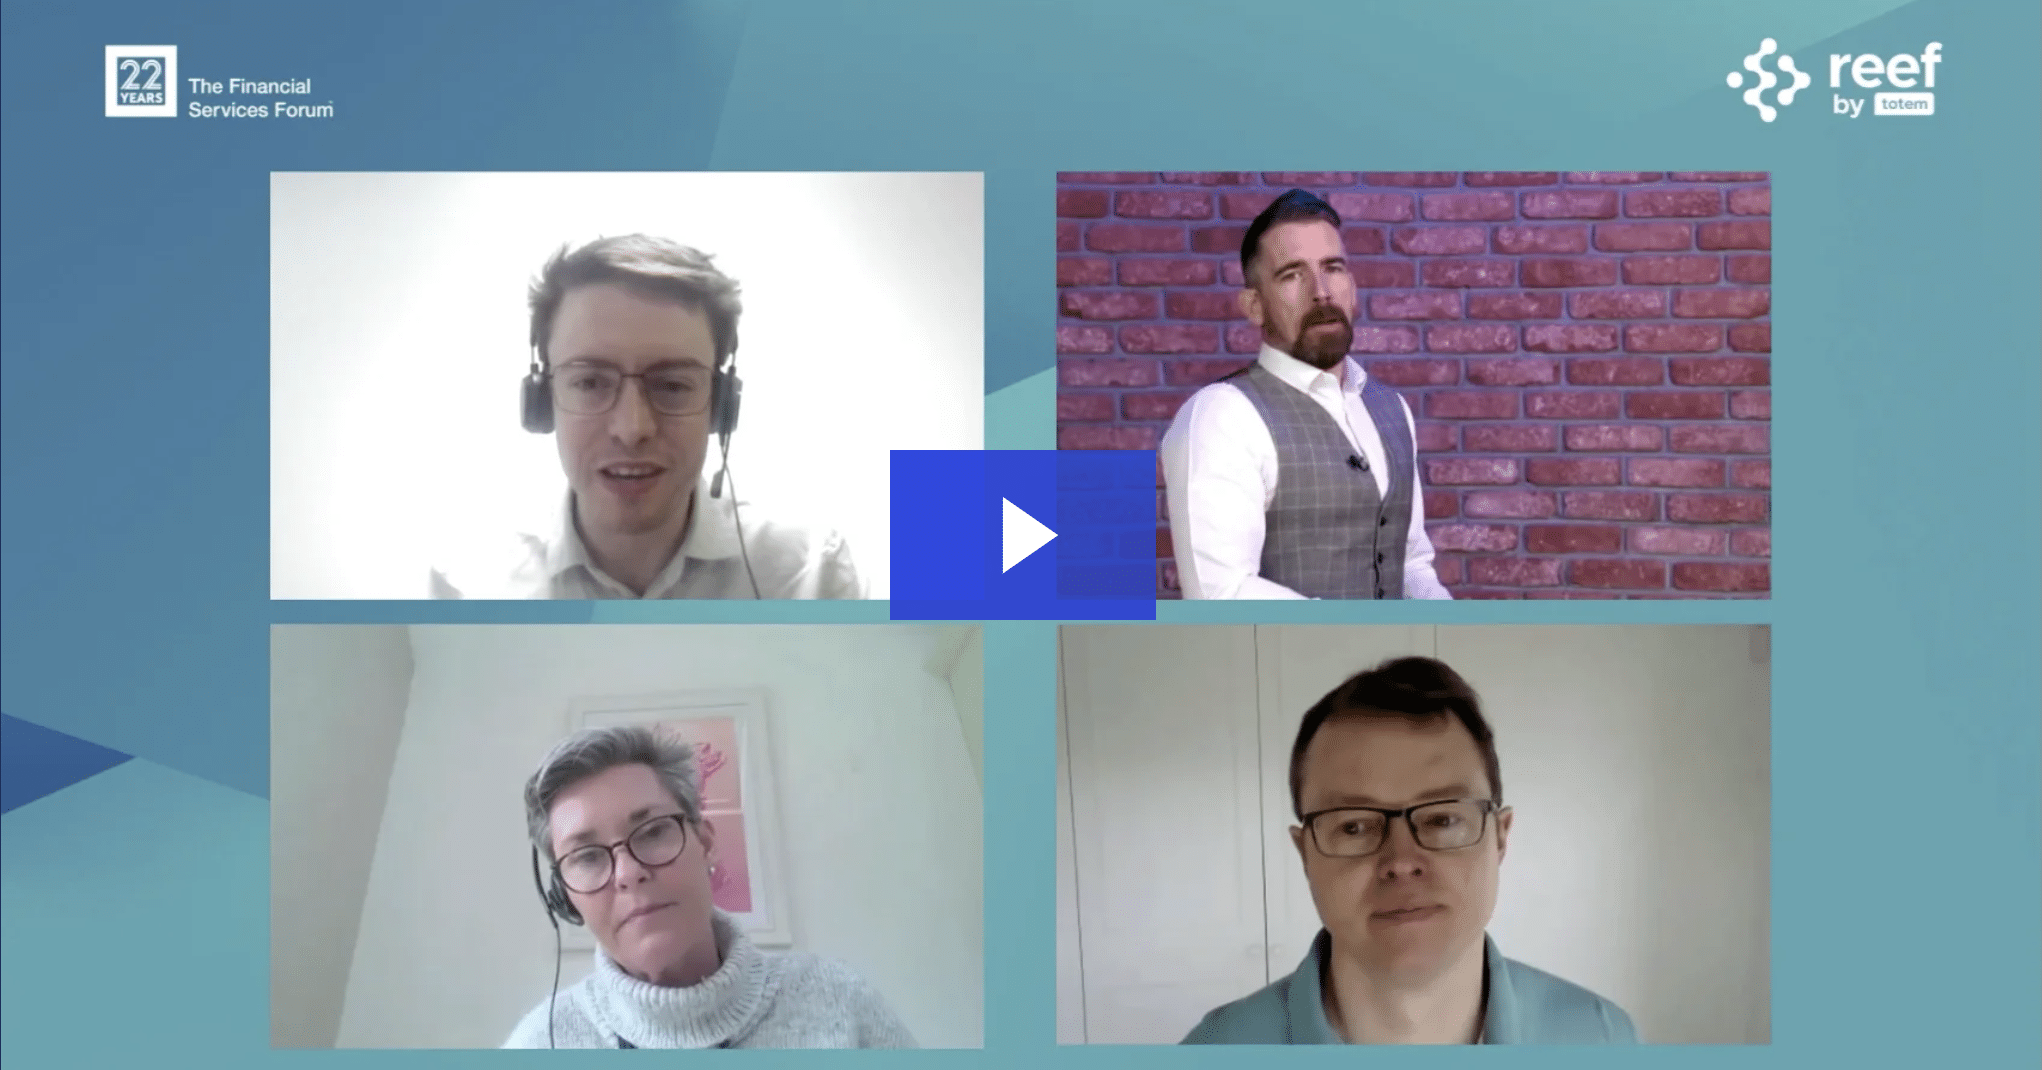 Speakers on the pannel of a webinar discussing client engagement